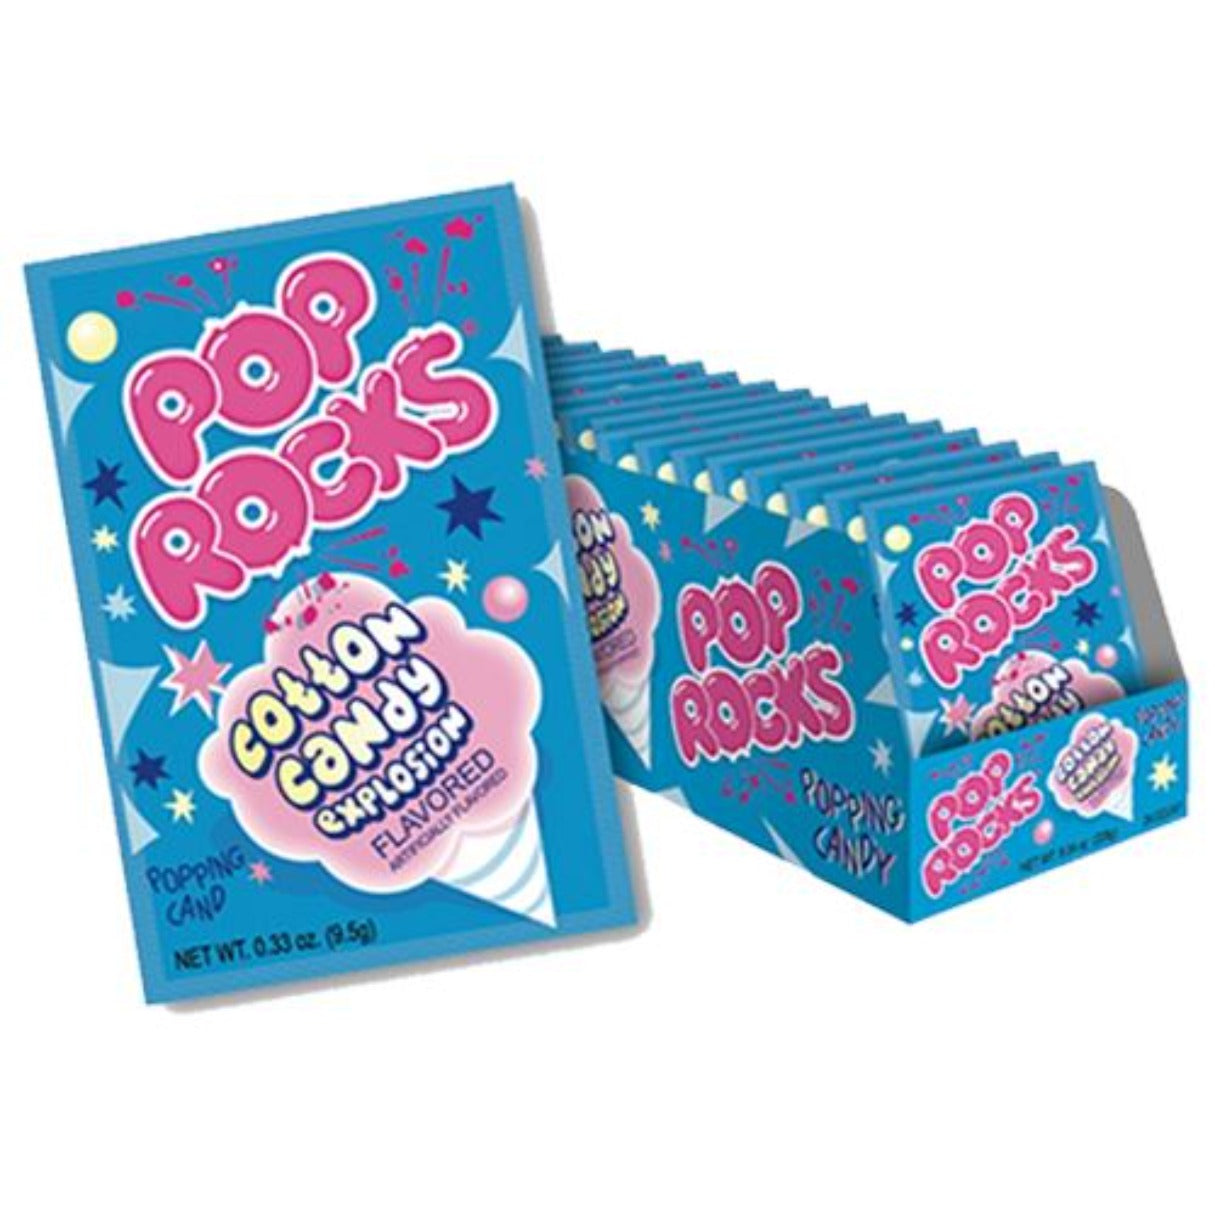 Pop Rocks Cotton Candy Popping Candy .33oz - 24ct